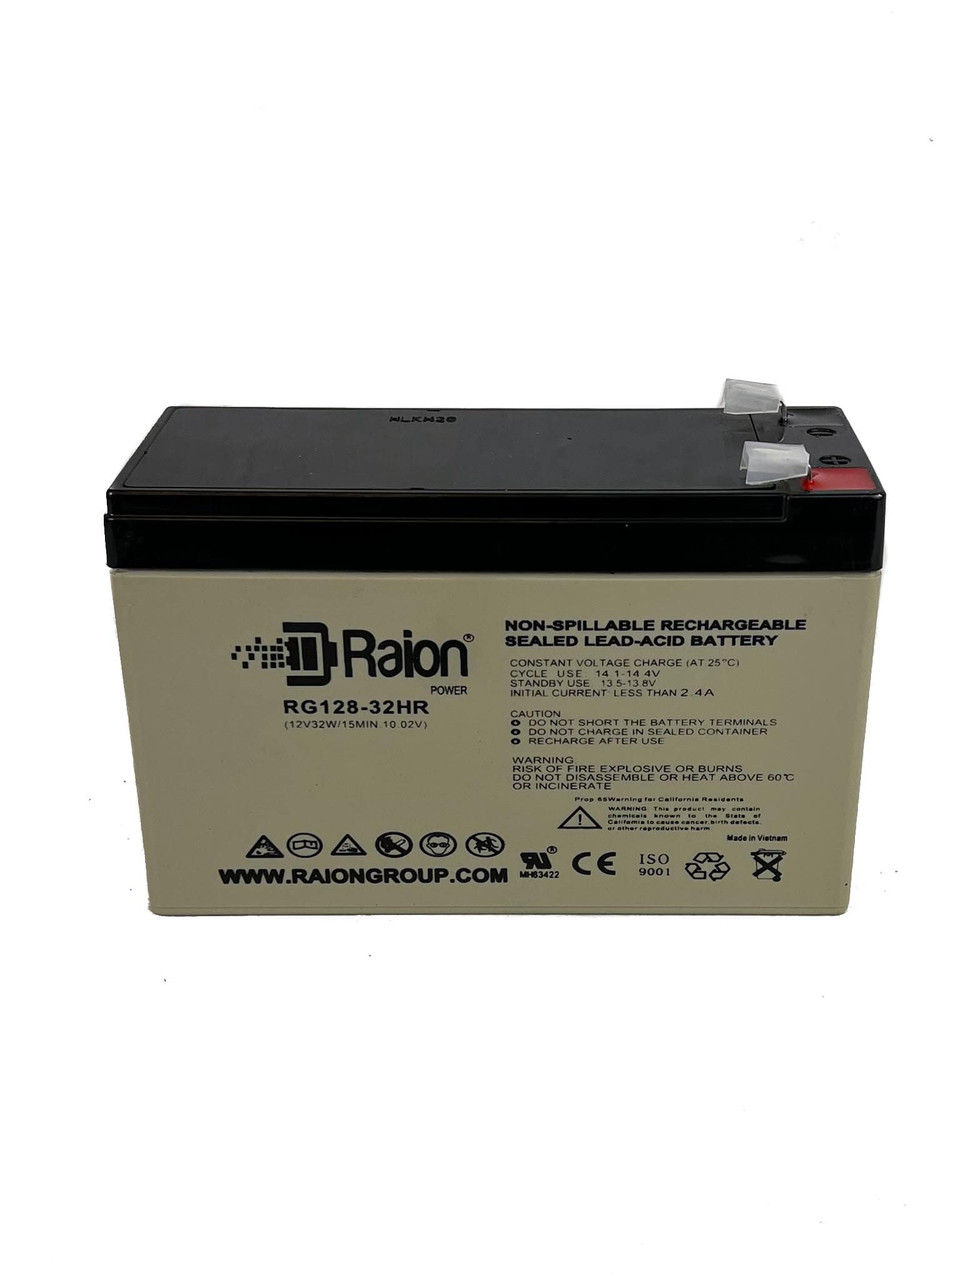 Raion Power RG128-32HR Replacement High Rate Battery Cartridge for Minuteman 450